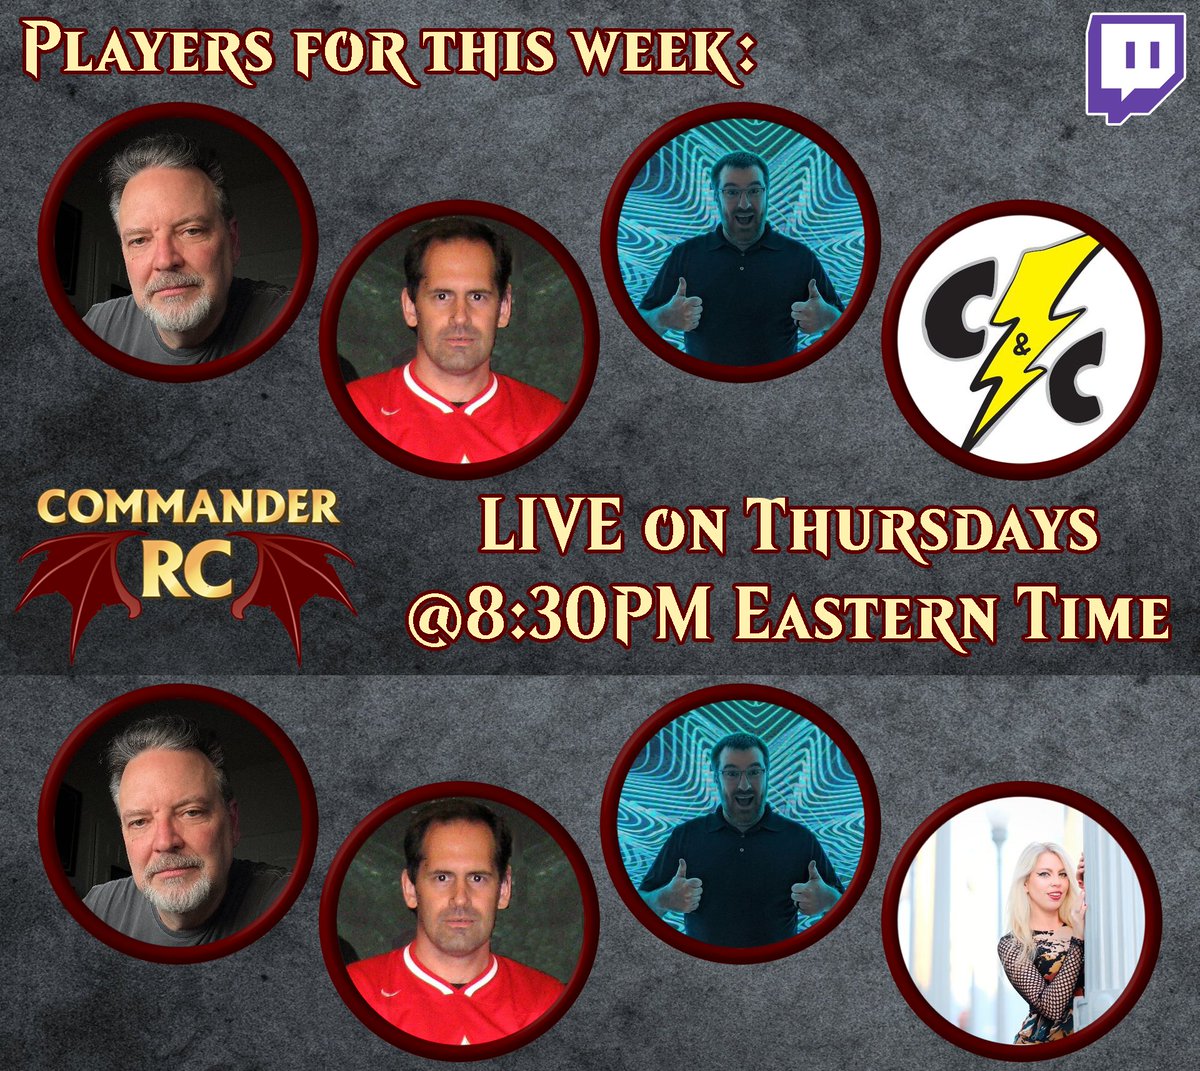 Everyone go check out the @mtgcommander stream tonight! They're LIVE now with Pod 1 with @ScottLarabee @genomancer @SteelCityBrad and @CnCPowerHour! After Game 1, they'll be joined by none other than @ZBexx for Game 2! twitch.tv/commanderrc